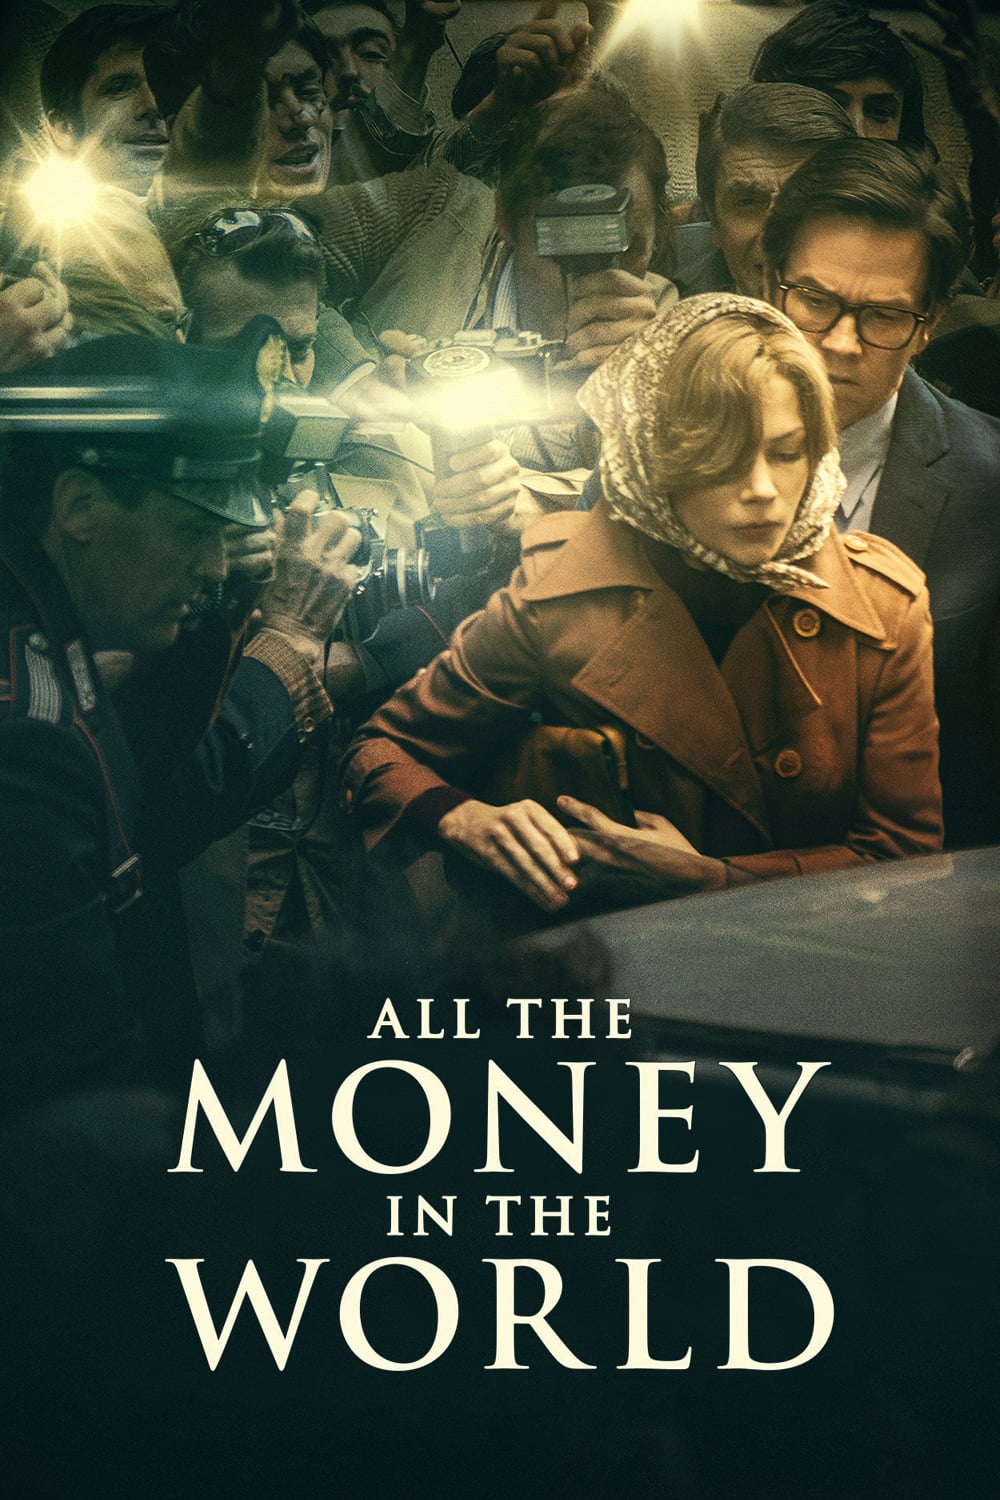 Poster for the movie "All the Money in the World"